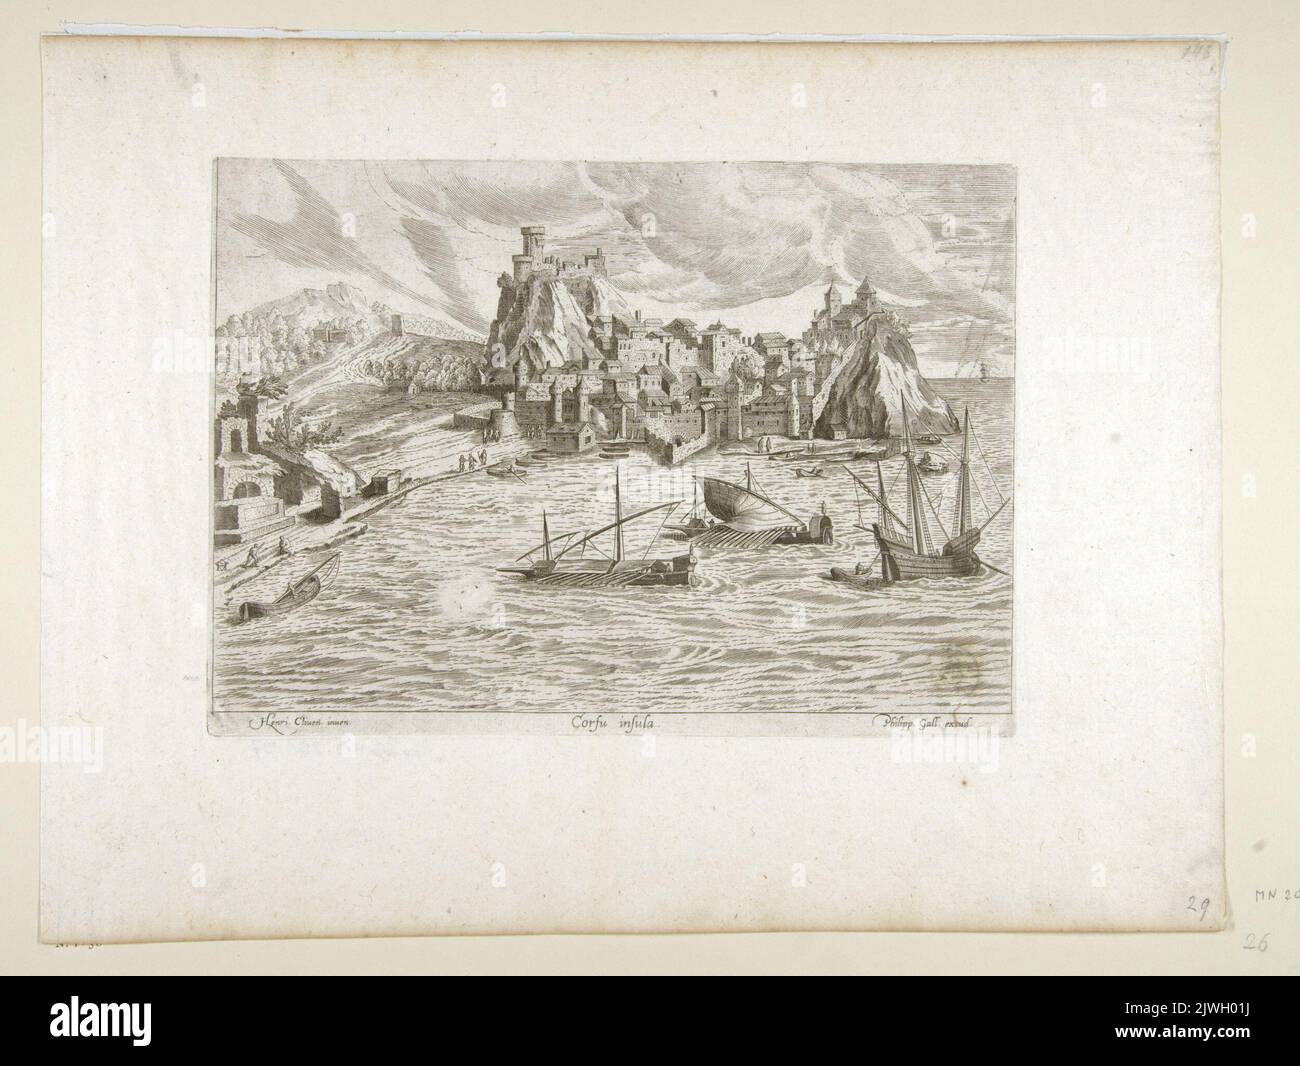 View of the Island of Corfu from the side of the sea - Corfu insula. Galle, Theodor (1571-1633), graphic artist, Galle, Philips (1537-1612), graphic artist, Cleve, Hendrick van, III (ca 1525-1589), draughtsman, cartoonist Stock Photo